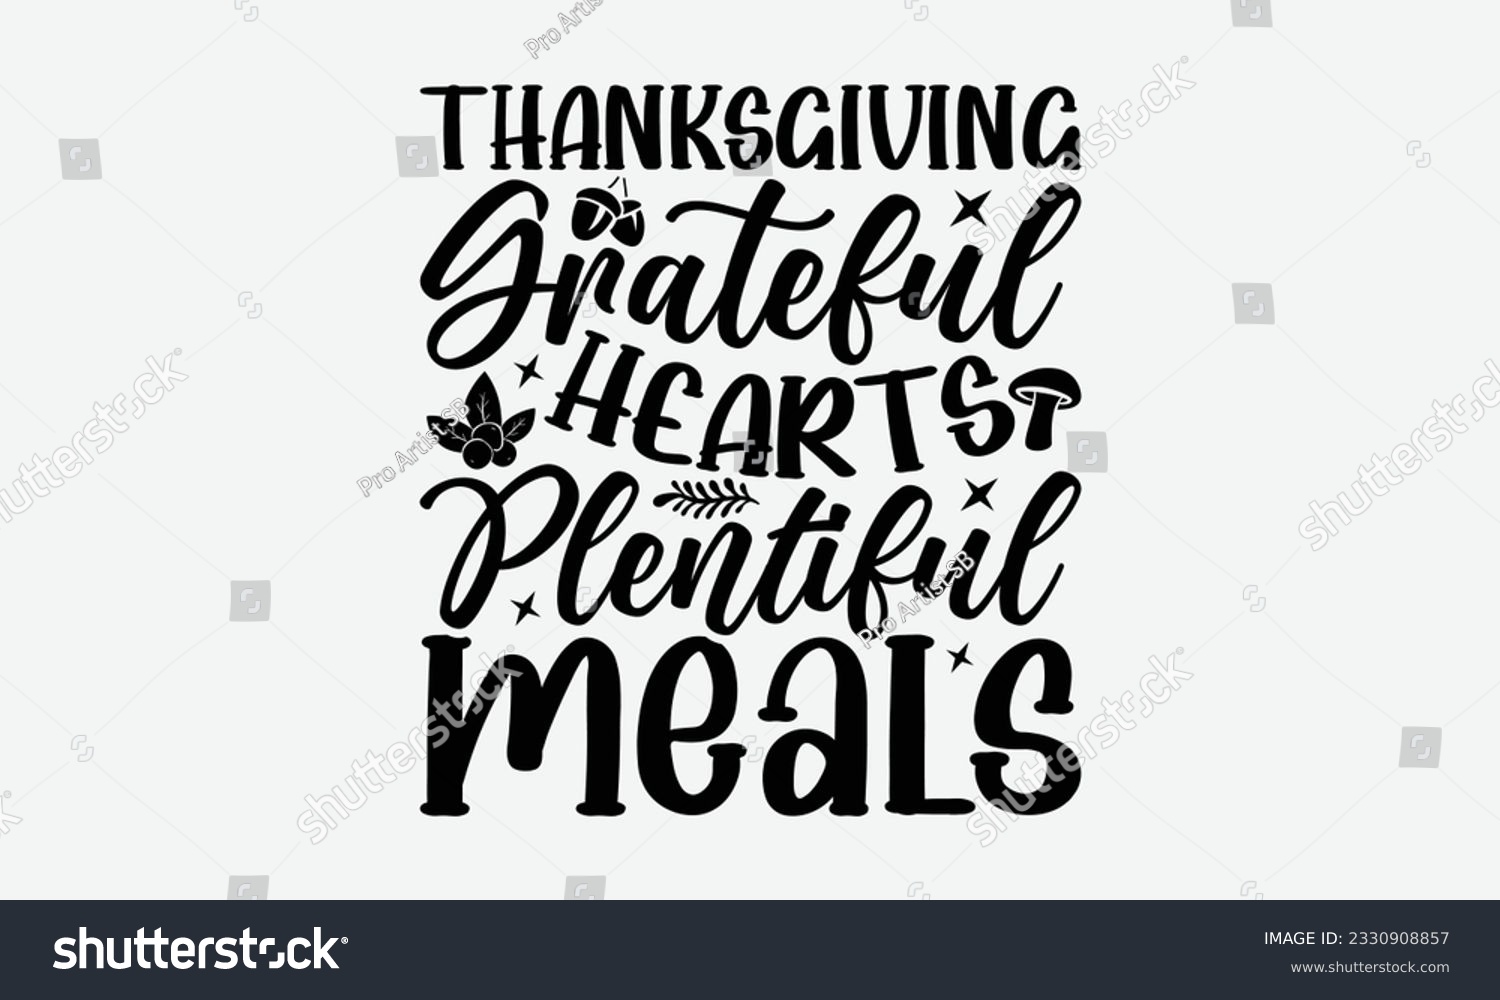 SVG of Thanksgiving Grateful Hearts Plentiful Meals - Thanksgiving T-shirt Design Template, Thanksgiving Quotes File, Hand Drawn Lettering Phrase, SVG Files for Cutting Cricut and Silhouette. svg